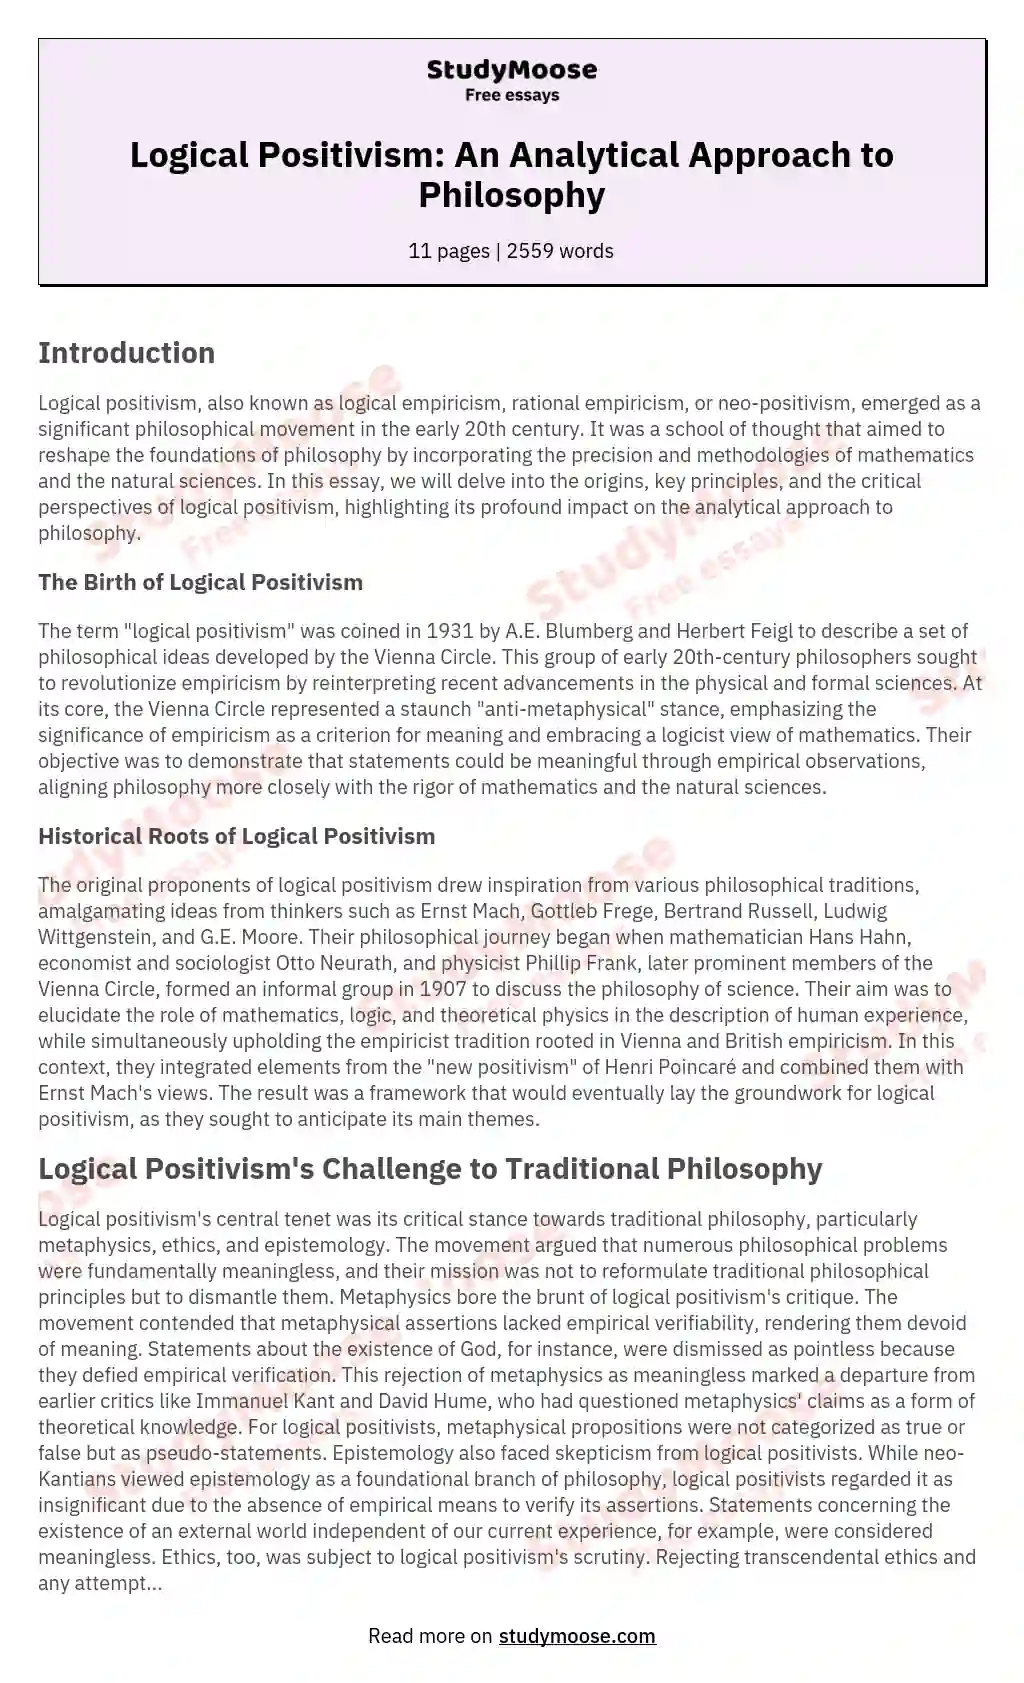 Logical Positivism: An Analytical Approach to Philosophy essay